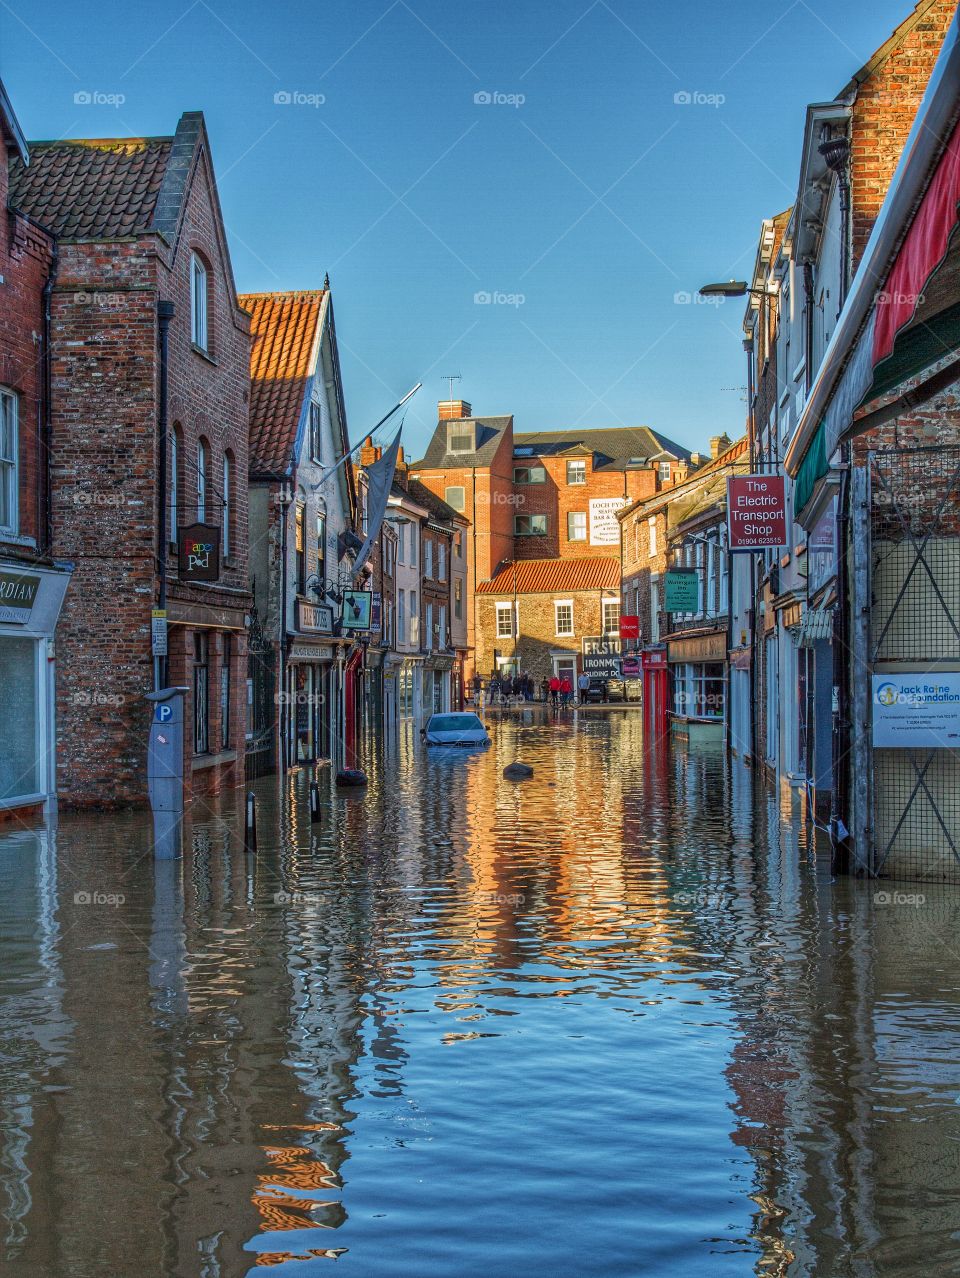 The flooded streets of York in England after heavy rainfall made The River Ouse burst its banks again.